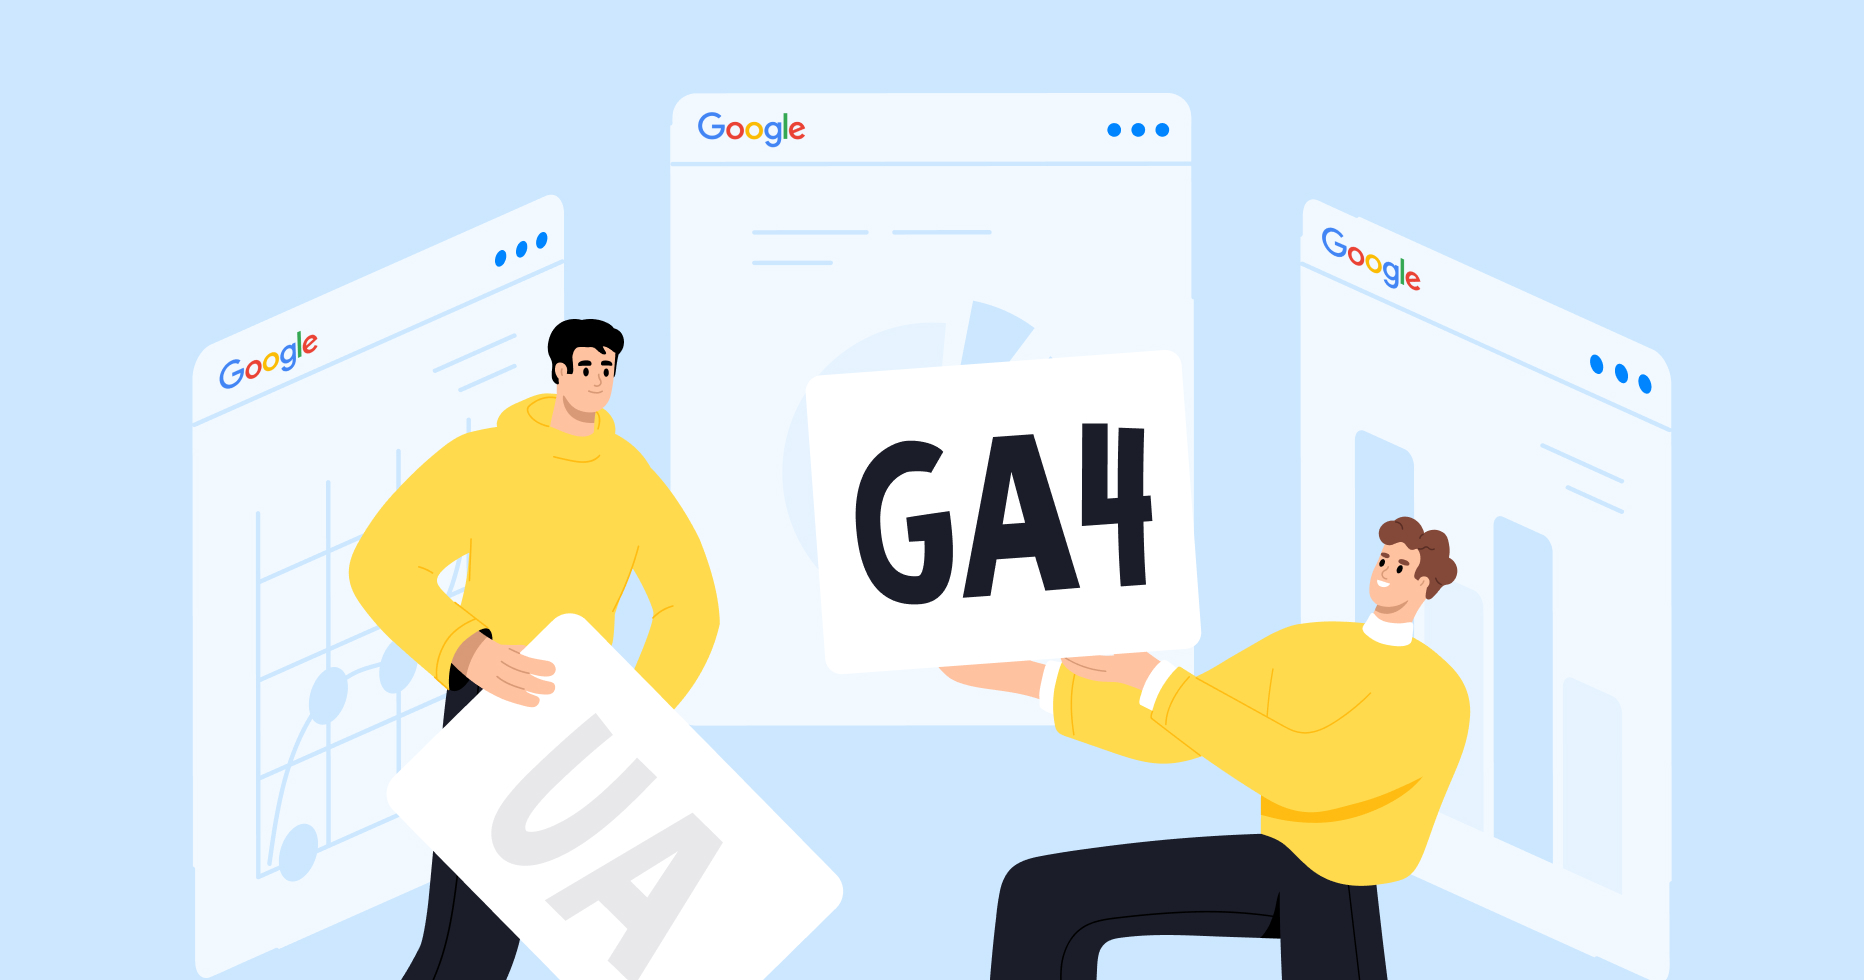 How to Migrate from Universal Analytics to GA4 and What You Should Know About Google’s New Analytics